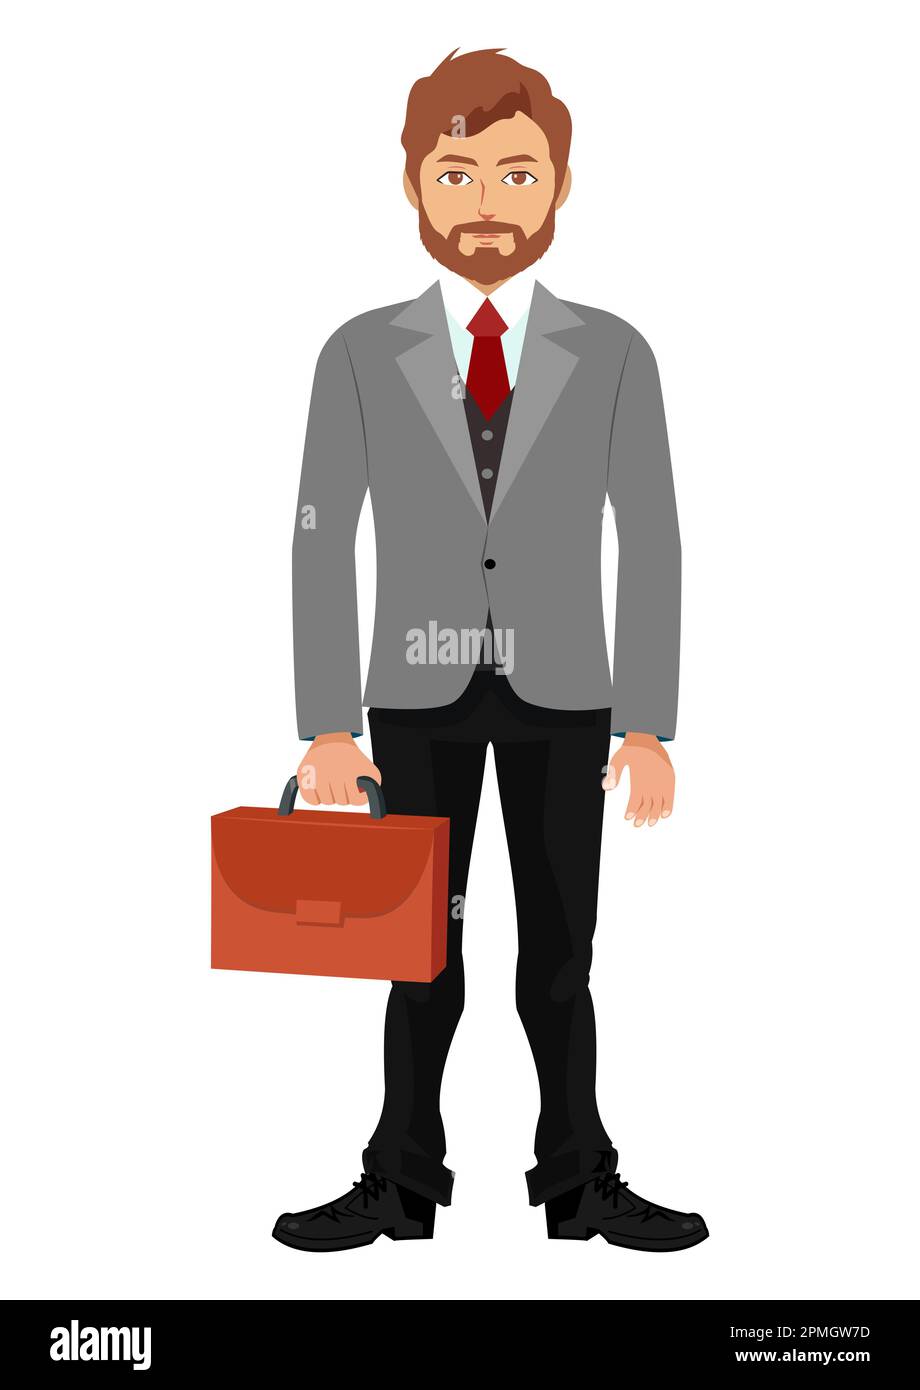 Vector illustration of businessman isolated on white background ...